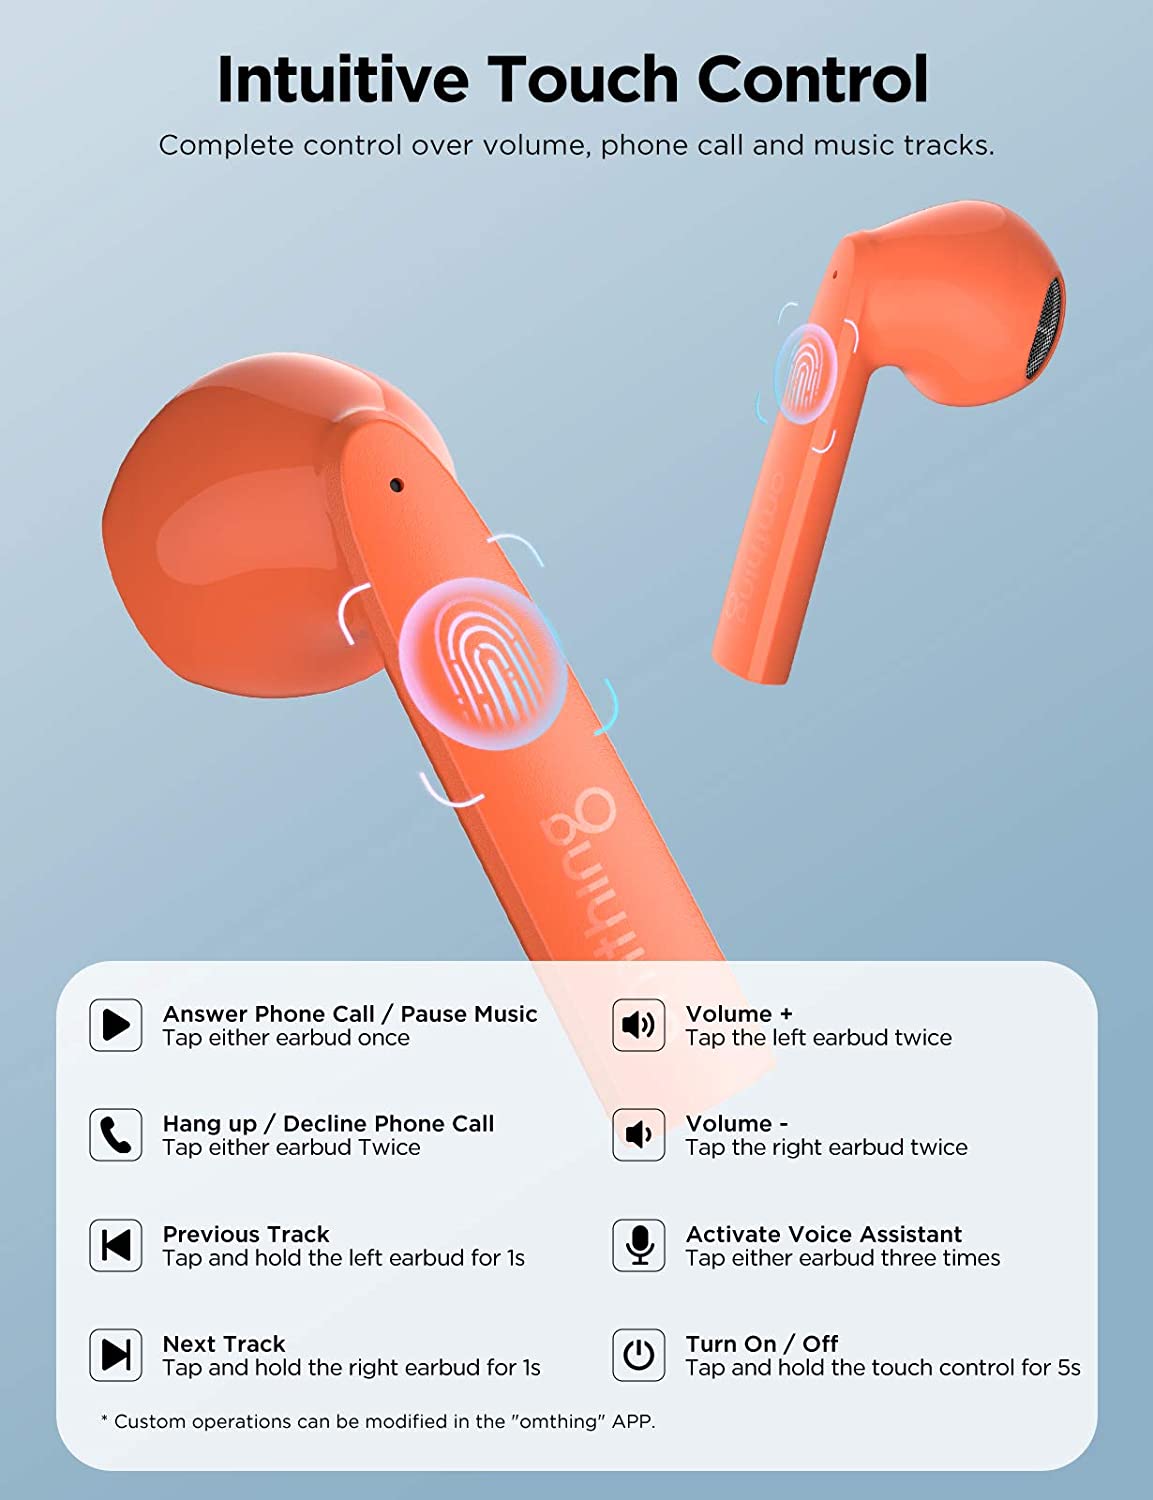 OMTHING - AirFree Pods Bluetooth Headphones, TWS, ENC Noise Cancellation, 25 Hour Battery, Wireless Charging, AAC Quality Sound, Orange